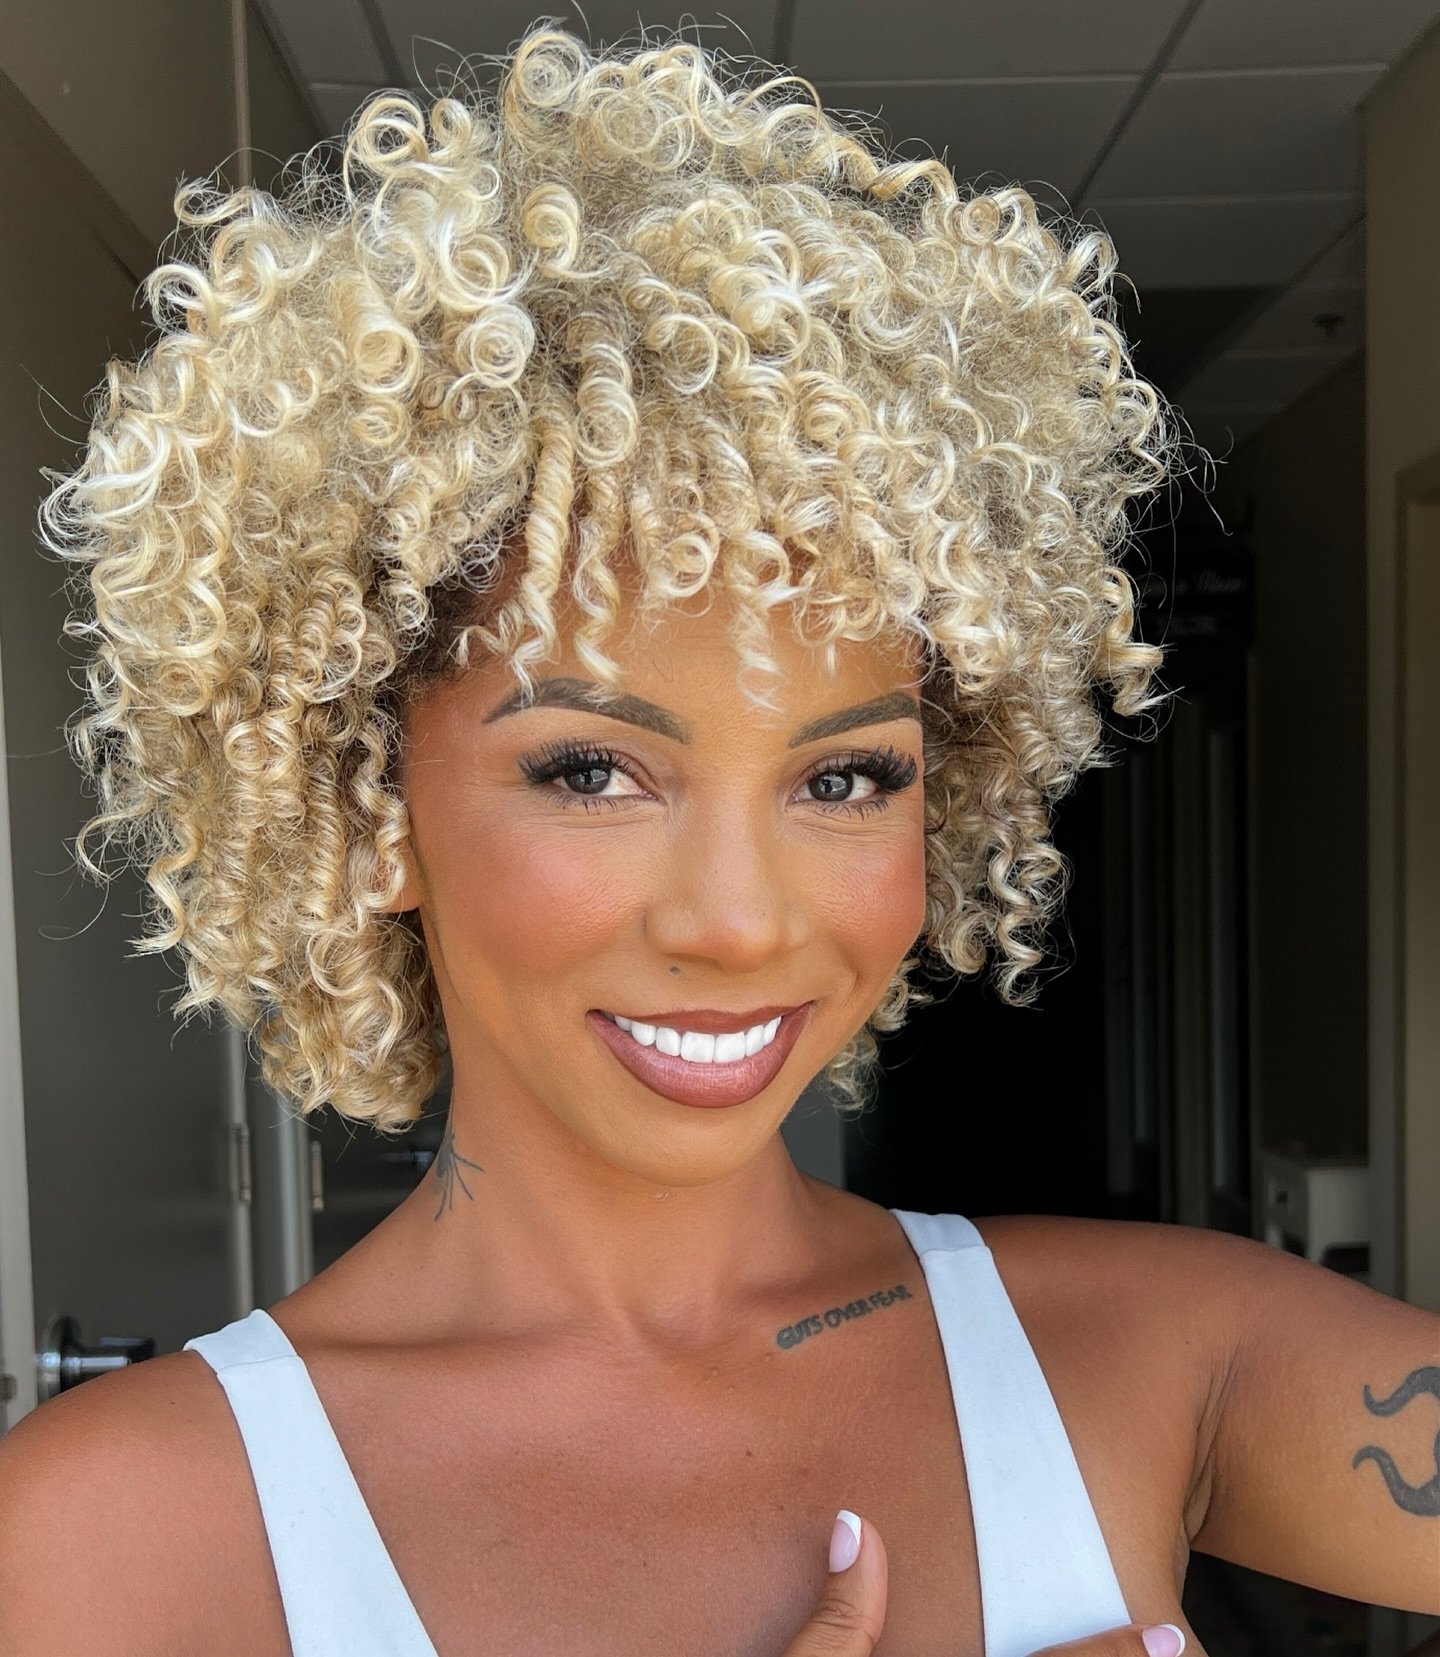 It&rsquo;s a BlondeCurl Summer ☀️

We brighten @bundleofbrittany for summer 
This was her second session taking it slowly to protect her curls . 

Bleach and tone @wellahairusa 

Treatment @k18hair 

#blondecurls #blondeforsummer #newhair #wellahair 